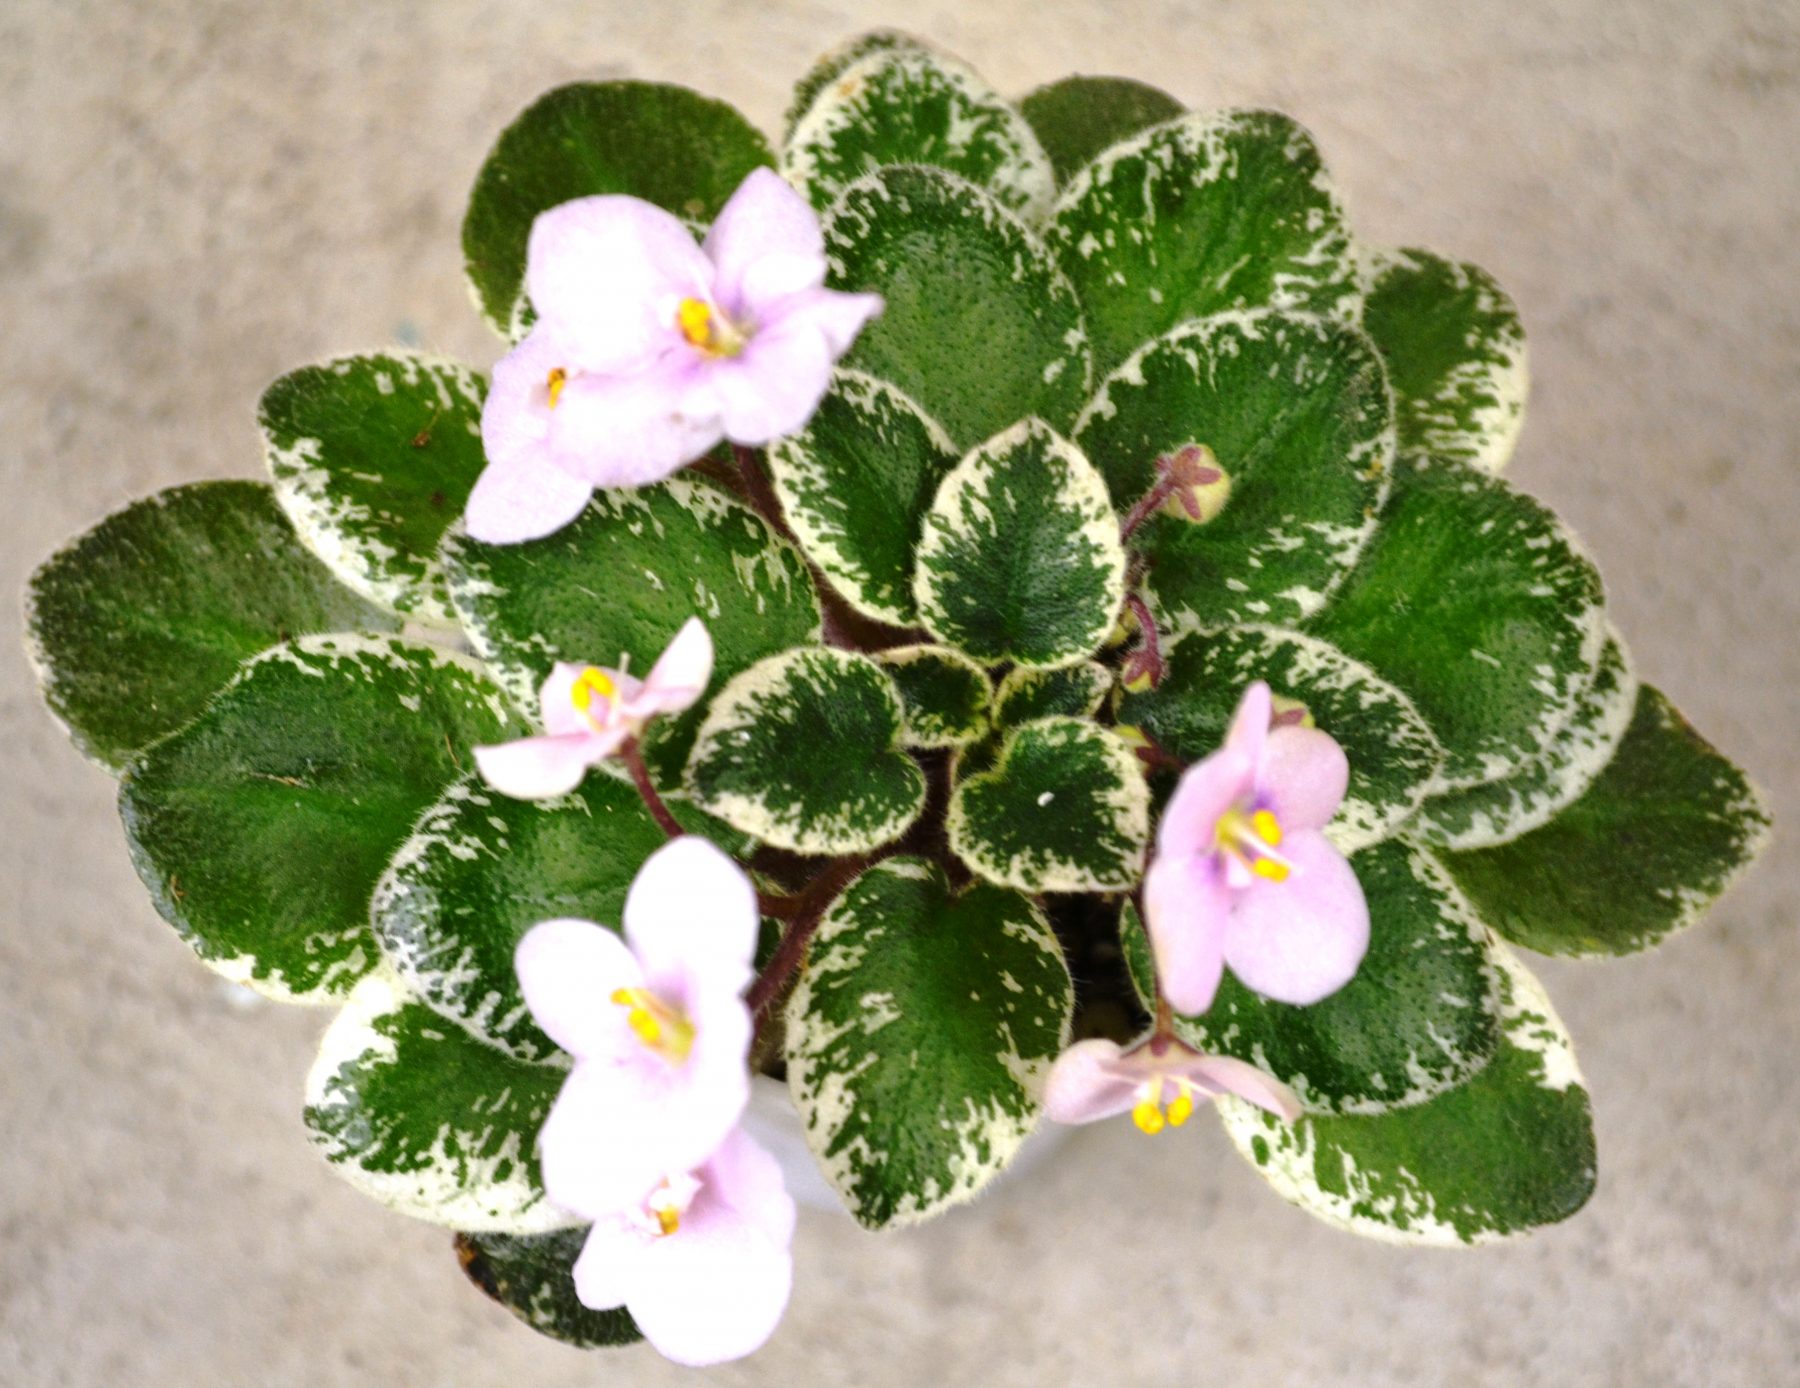 African Violet Show Plants How To Begin? Baby Violets